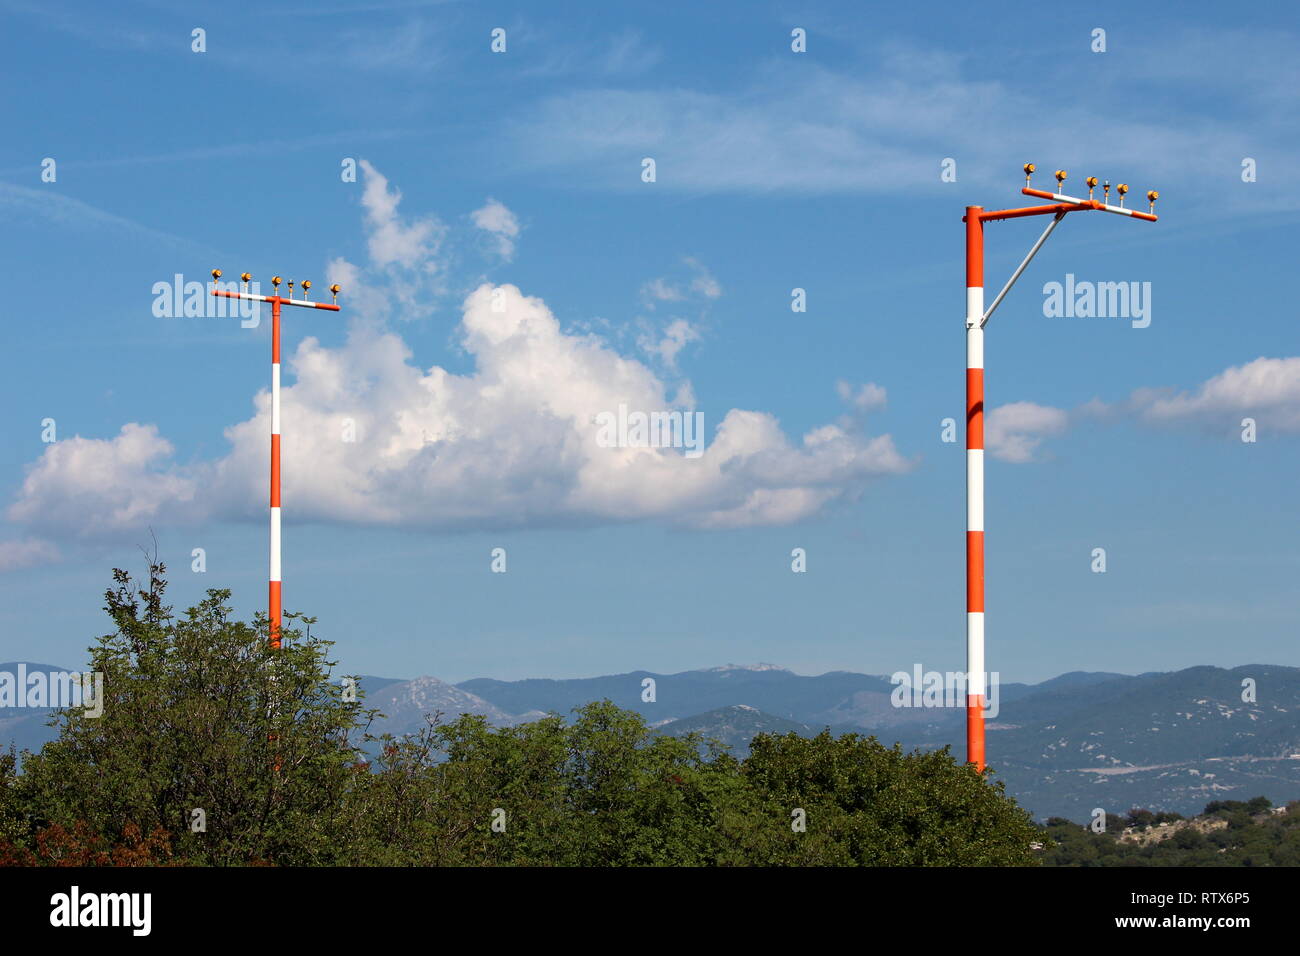 Two high metal red and white poles with multiple airport runway guiding lights rising high above dense trees with mountains and cloudy blue sky Stock Photo